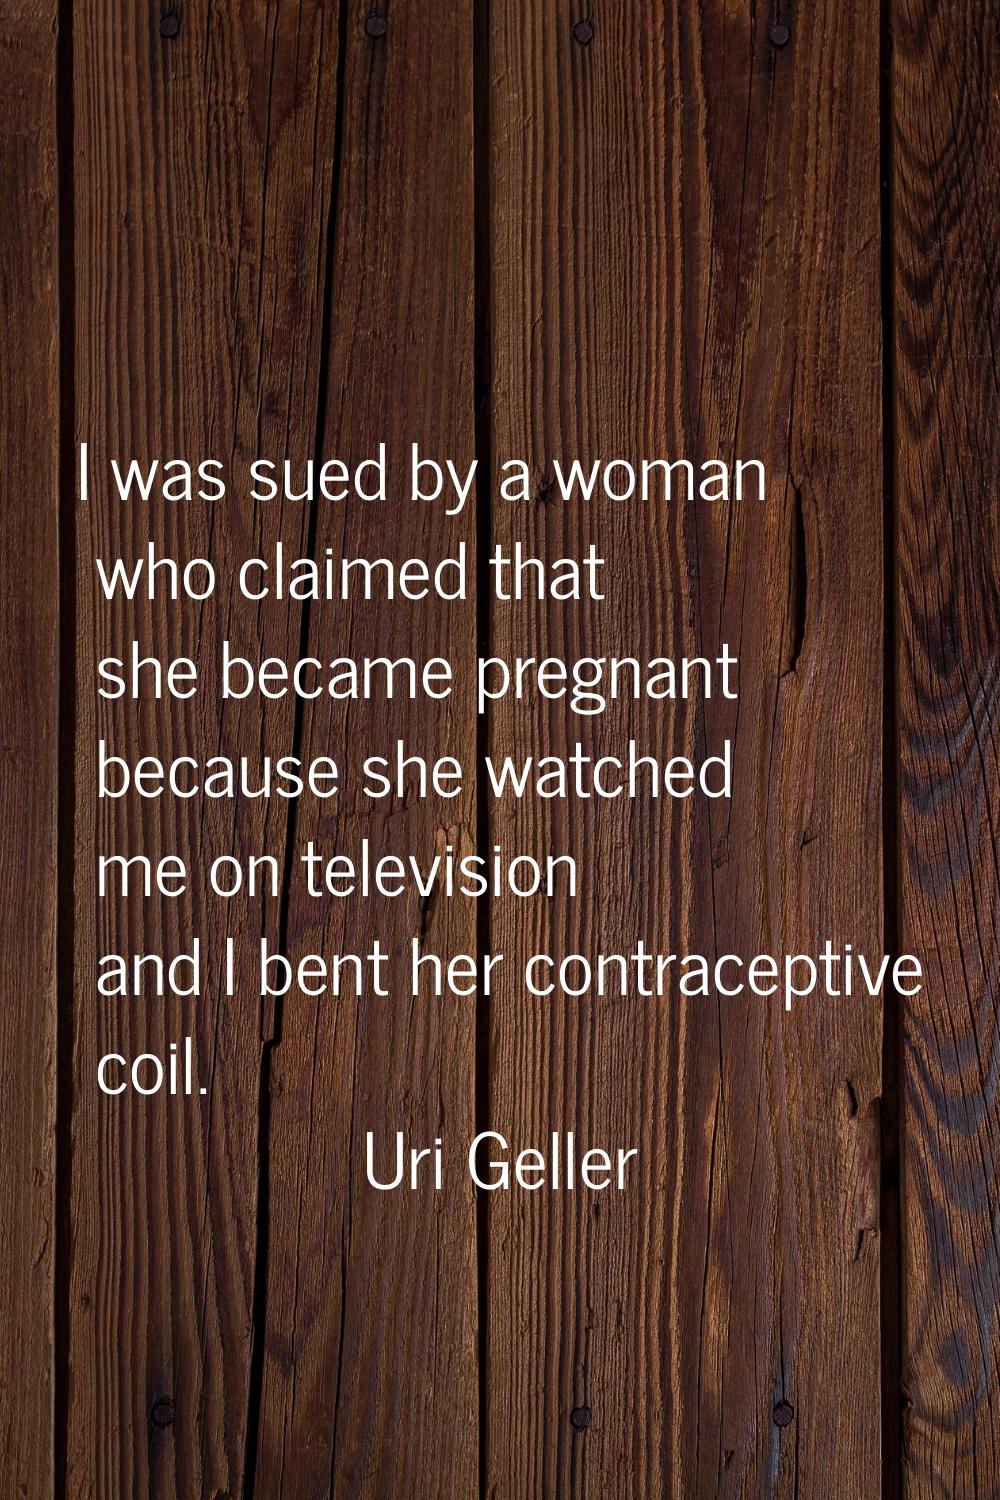 I was sued by a woman who claimed that she became pregnant because she watched me on television and